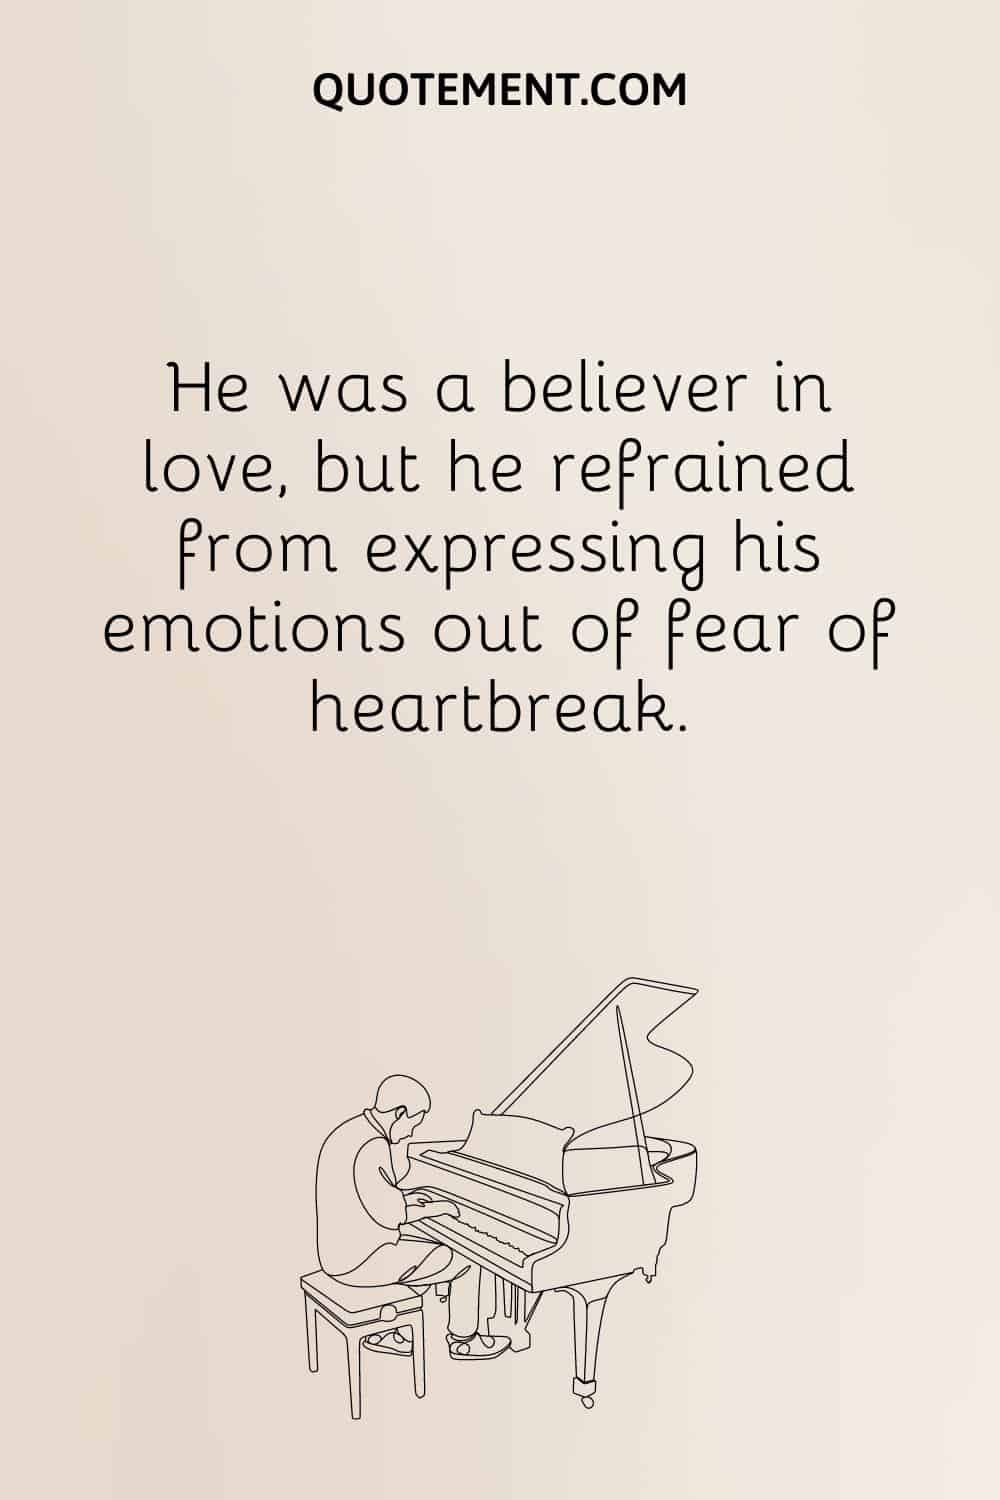 He was a believer in love, but he refrained from expressing his emotions out of fear of heartbreak.